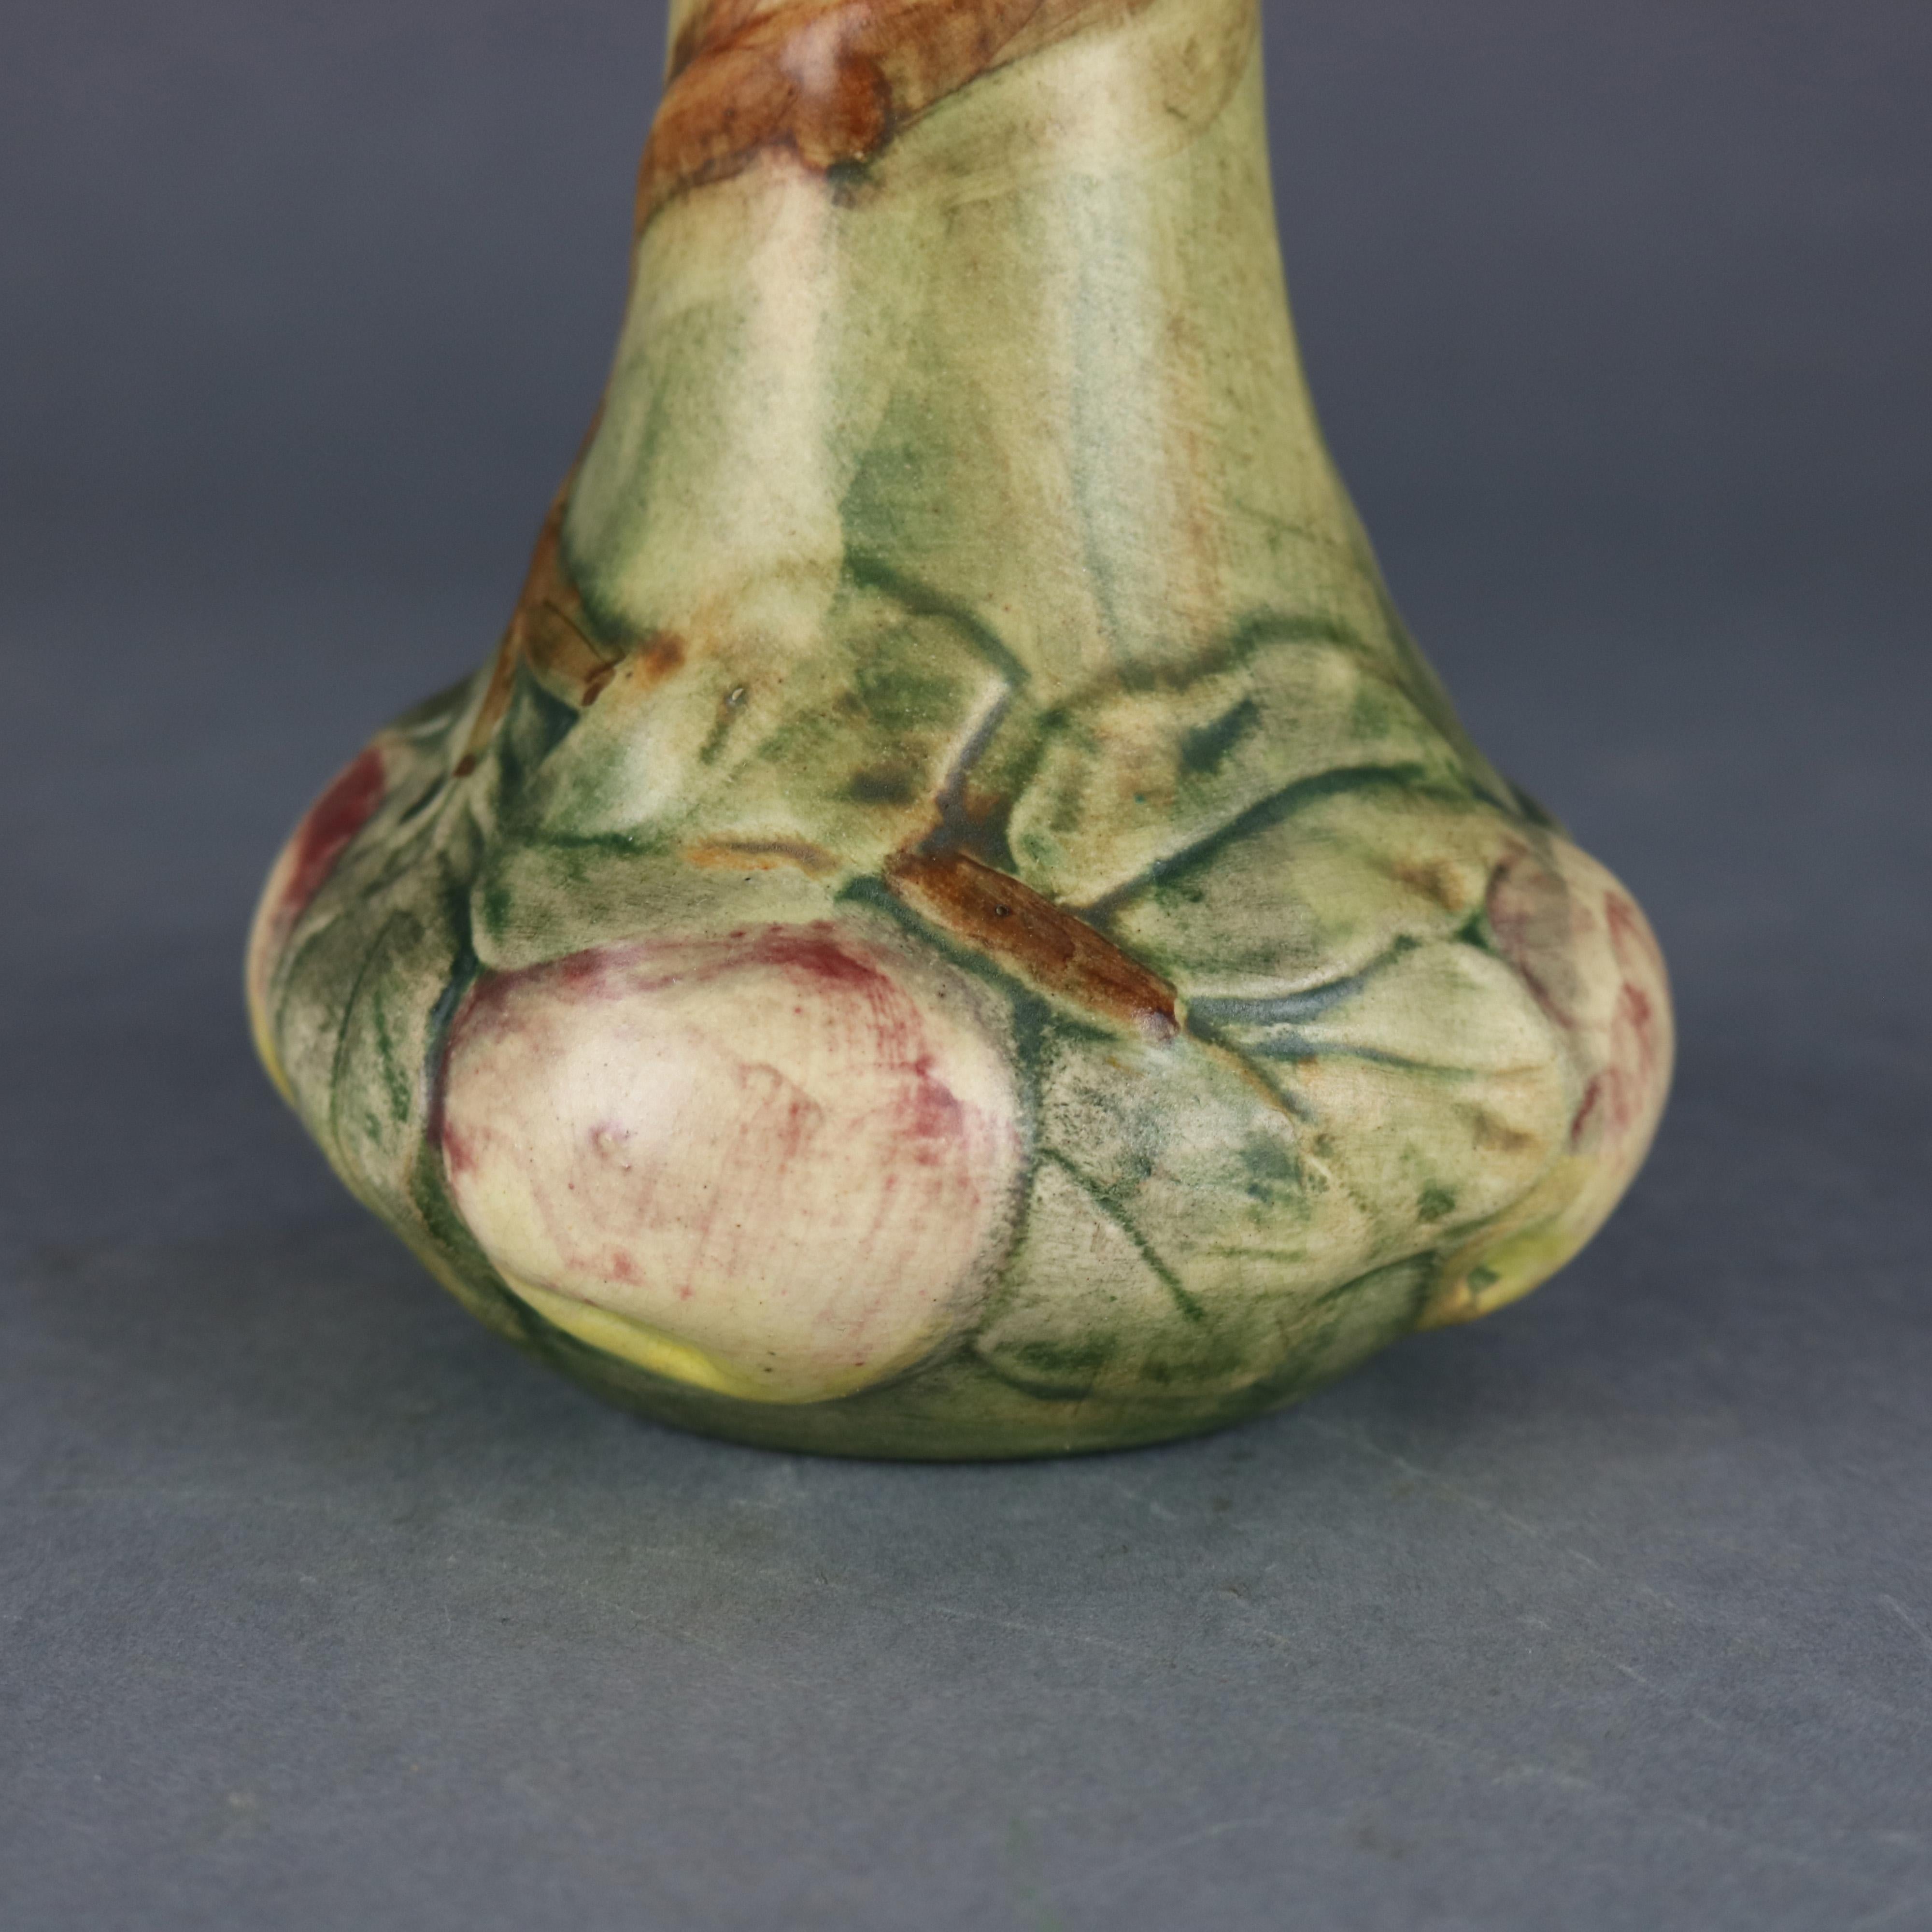 An antique Weller art pottery Woodcraft Baldin Apple Vase offers apple tree with branches, leaves and apples at base, marked on base as photographed, circa 1930

Measures: 8.5